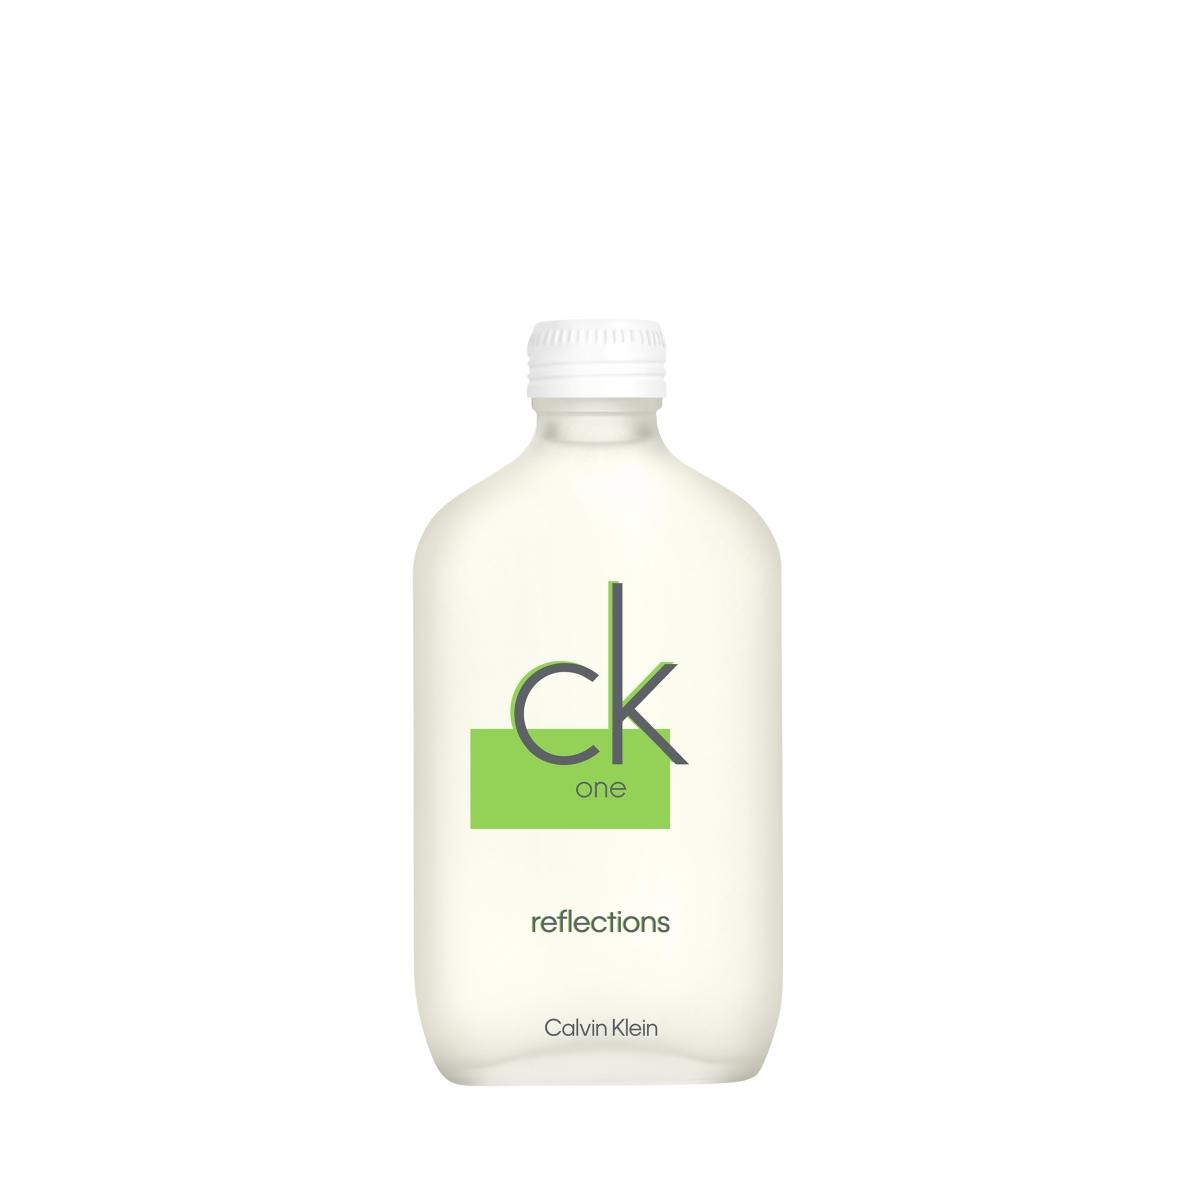 Ck One Reflections 100 ml